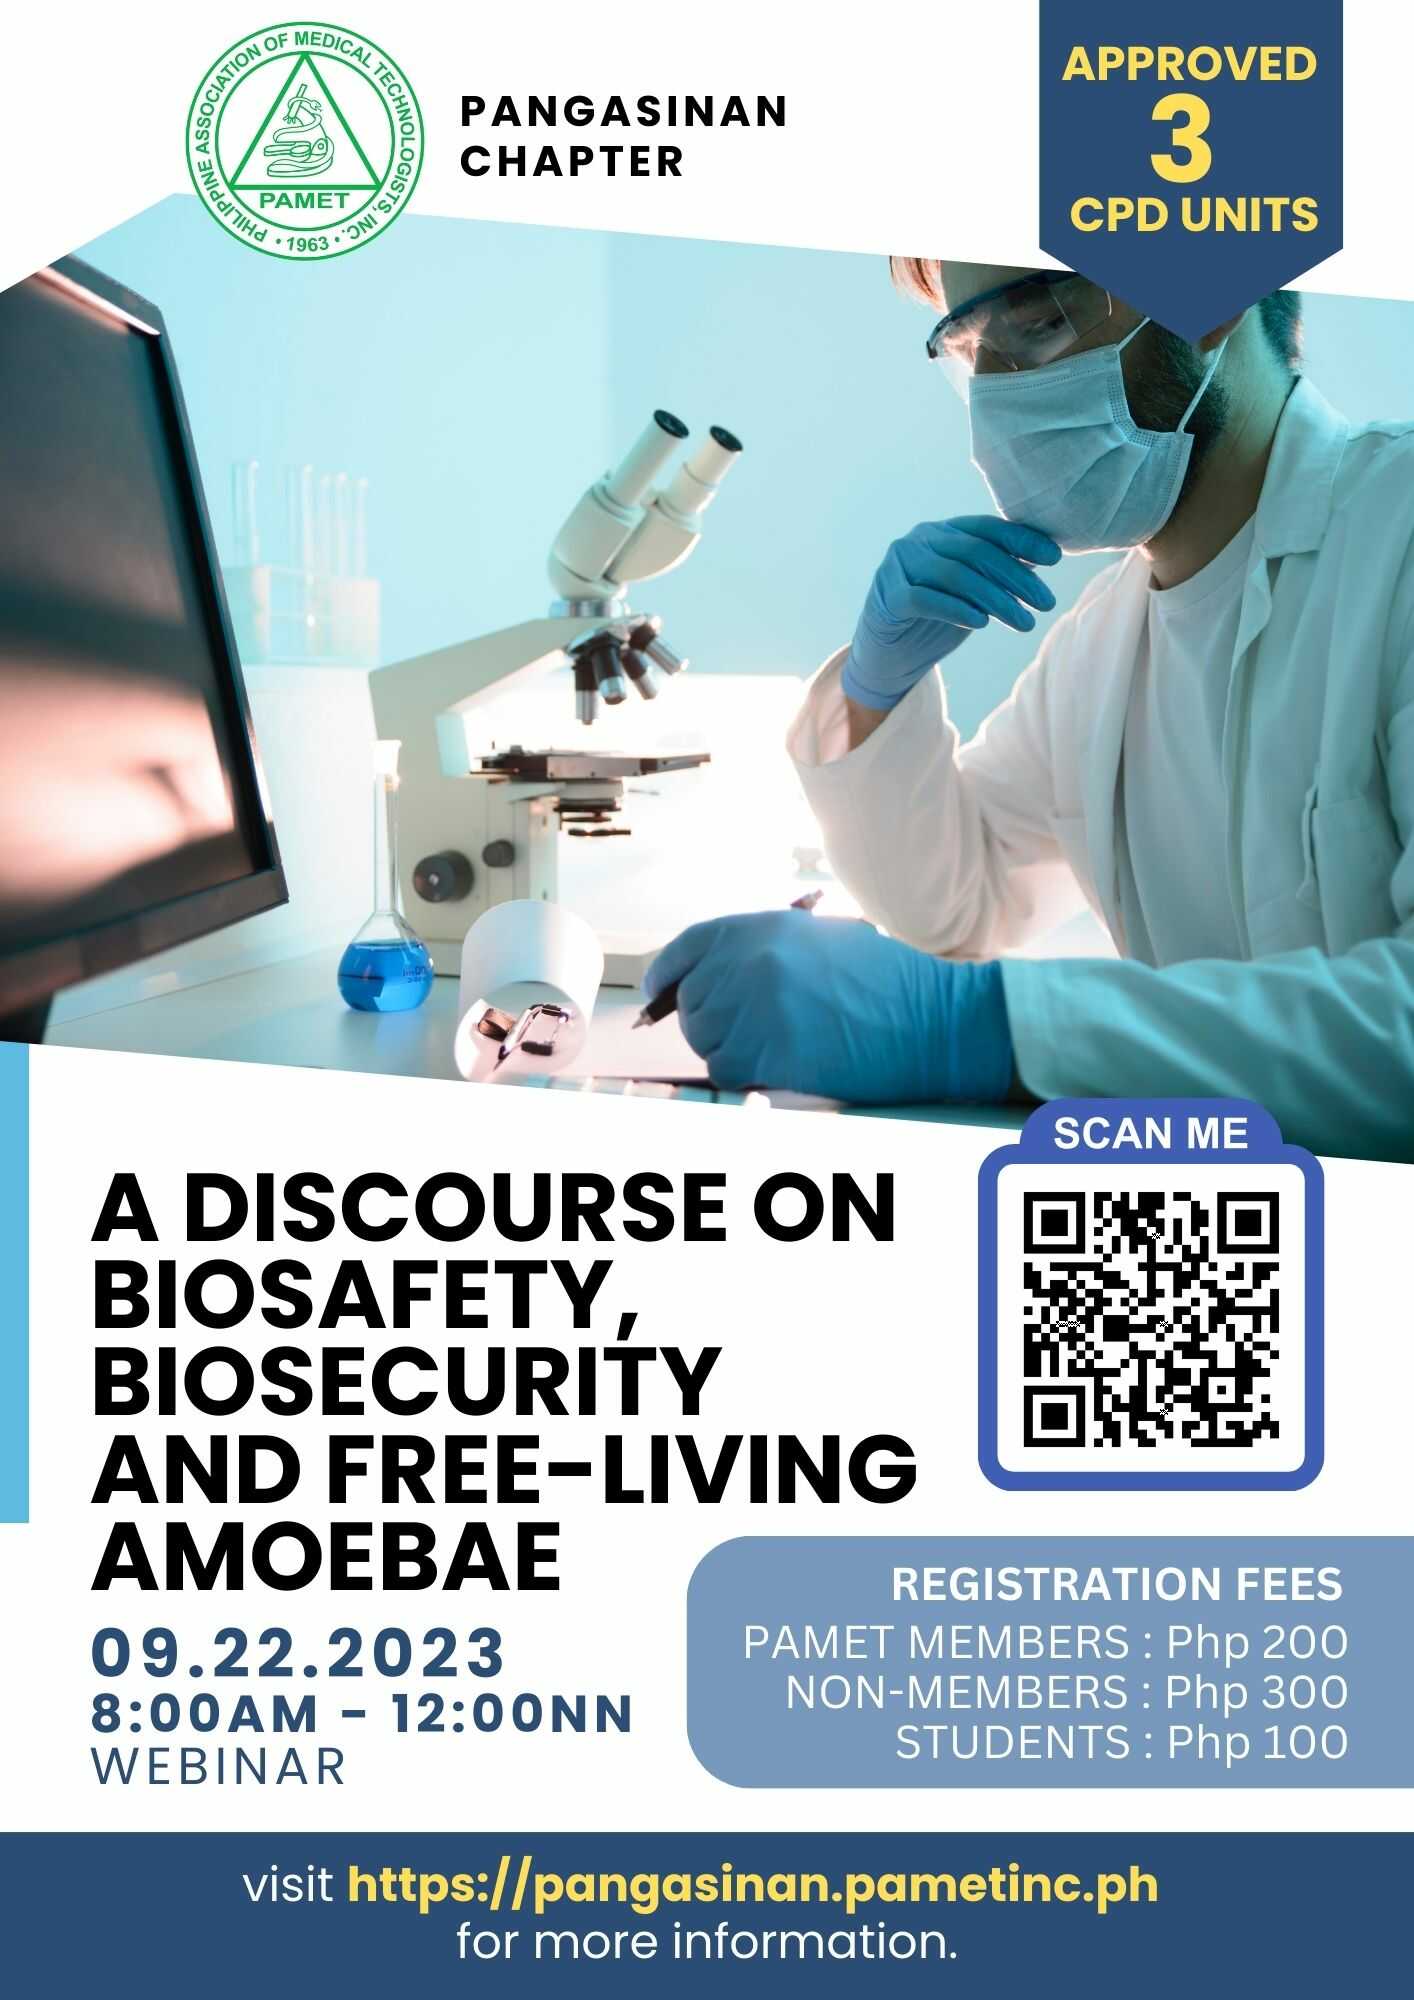 A Discourse on Biosafety, Biosecurity and Free-living Amoebae